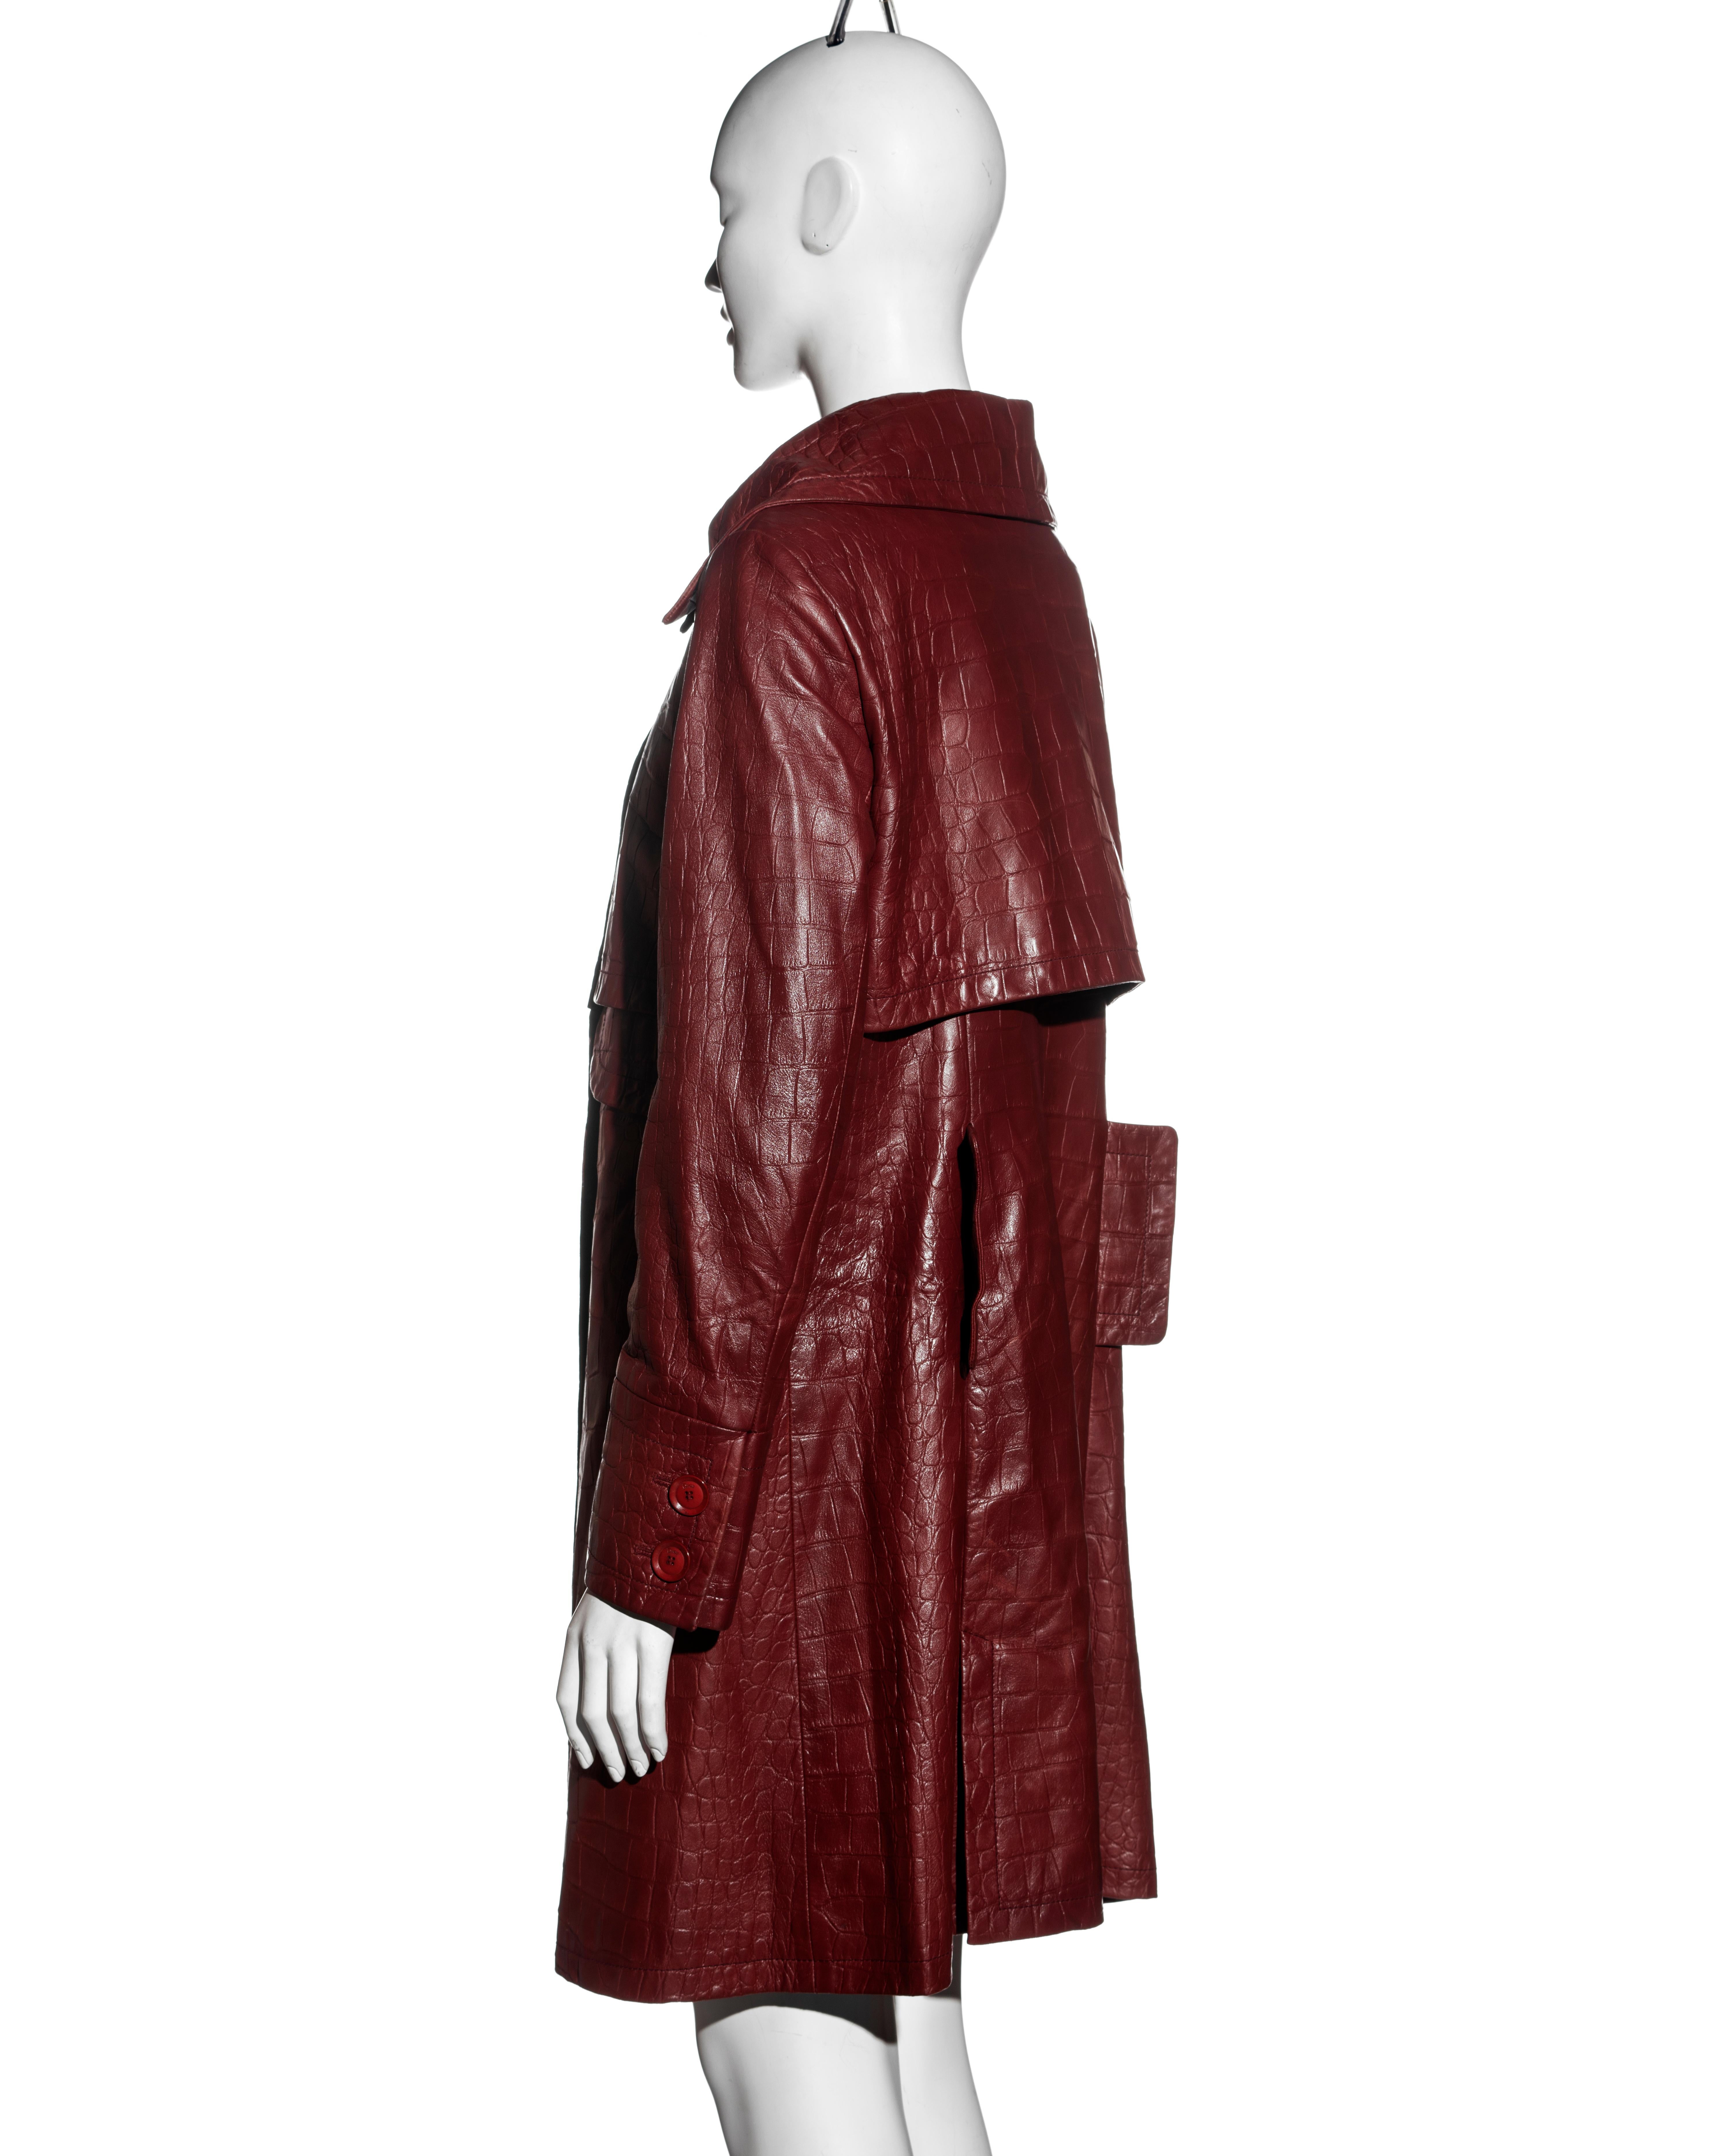 Christian Dior by John Galliano red croc-embossed lambskin leather coat, fw 2005 For Sale 3